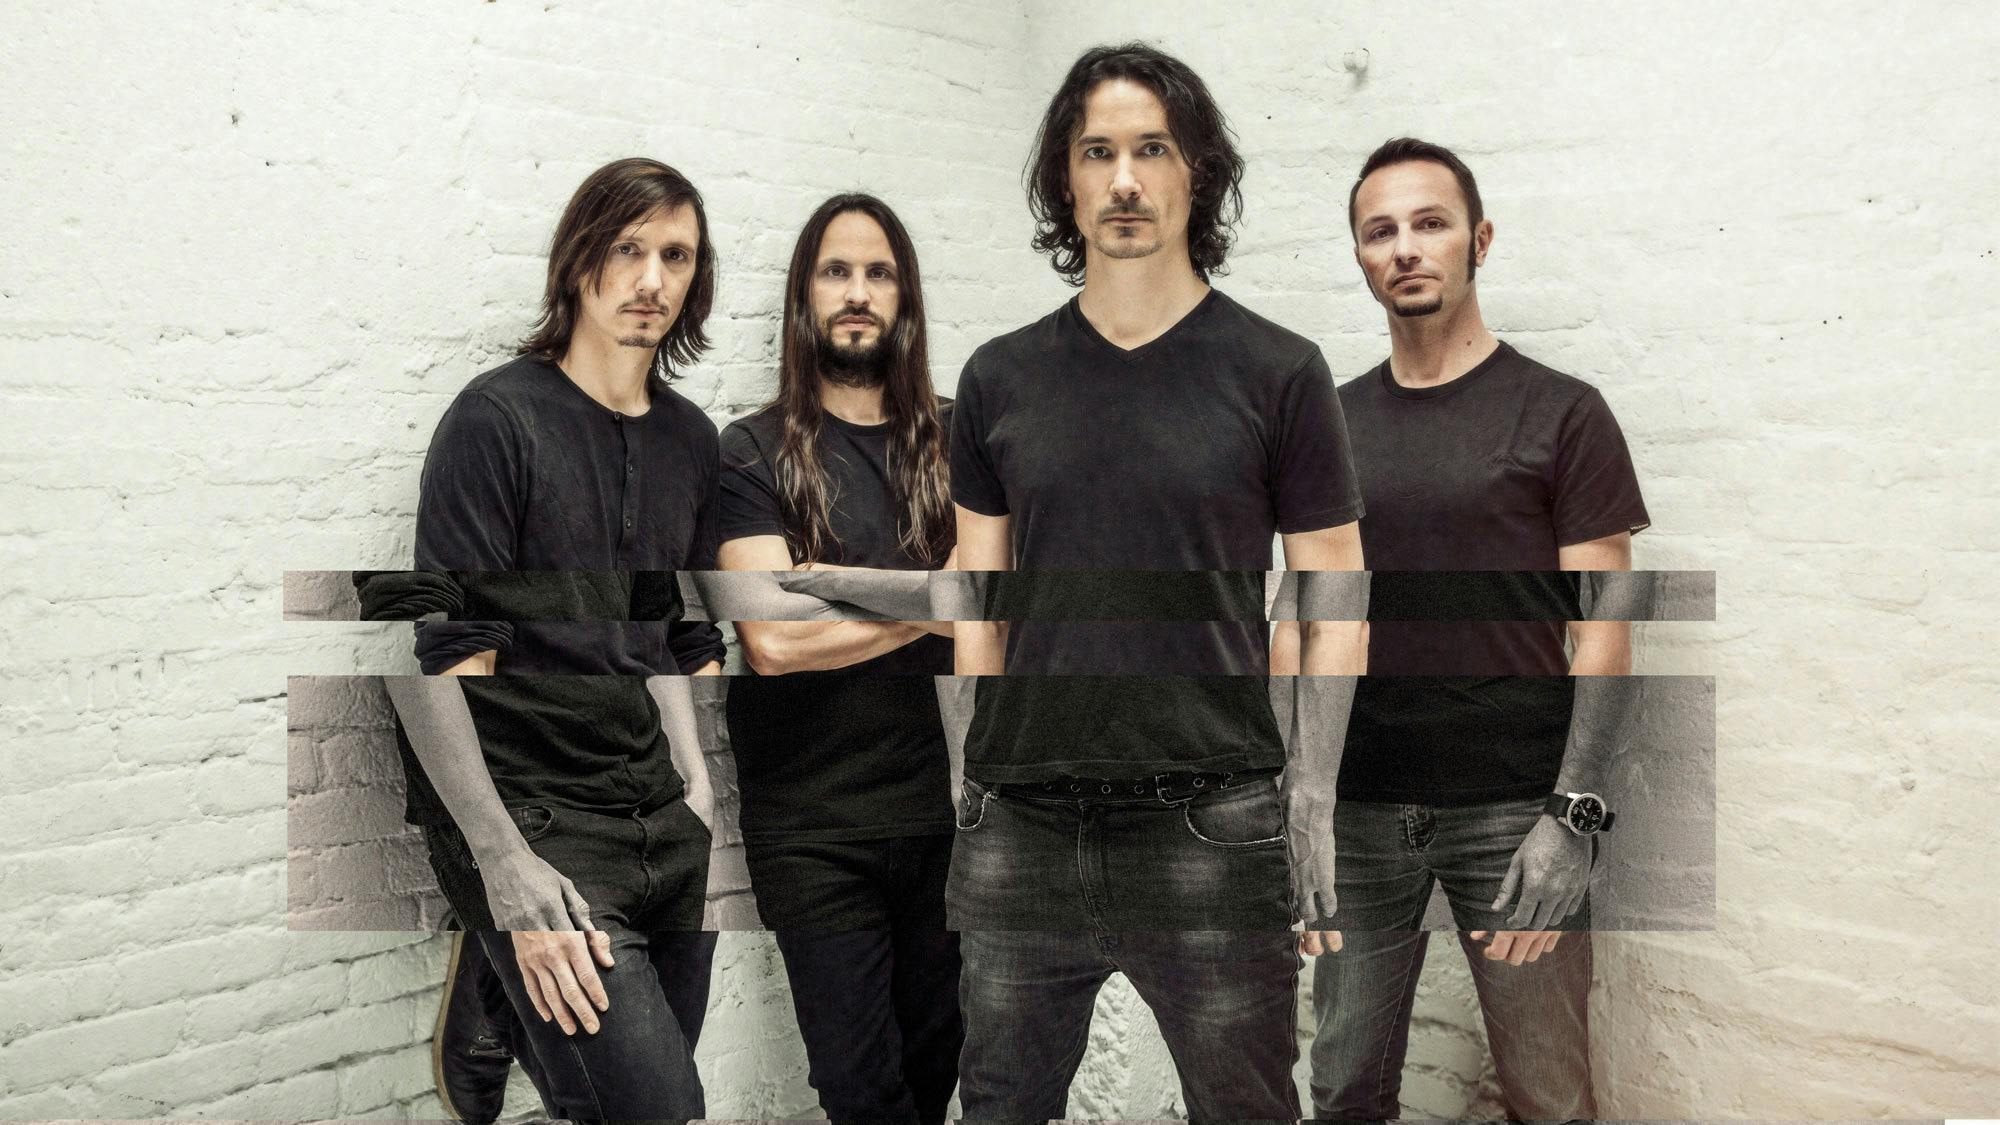 Gojira On Their New Album: "We Are Very Happy And Super Proud Of It"